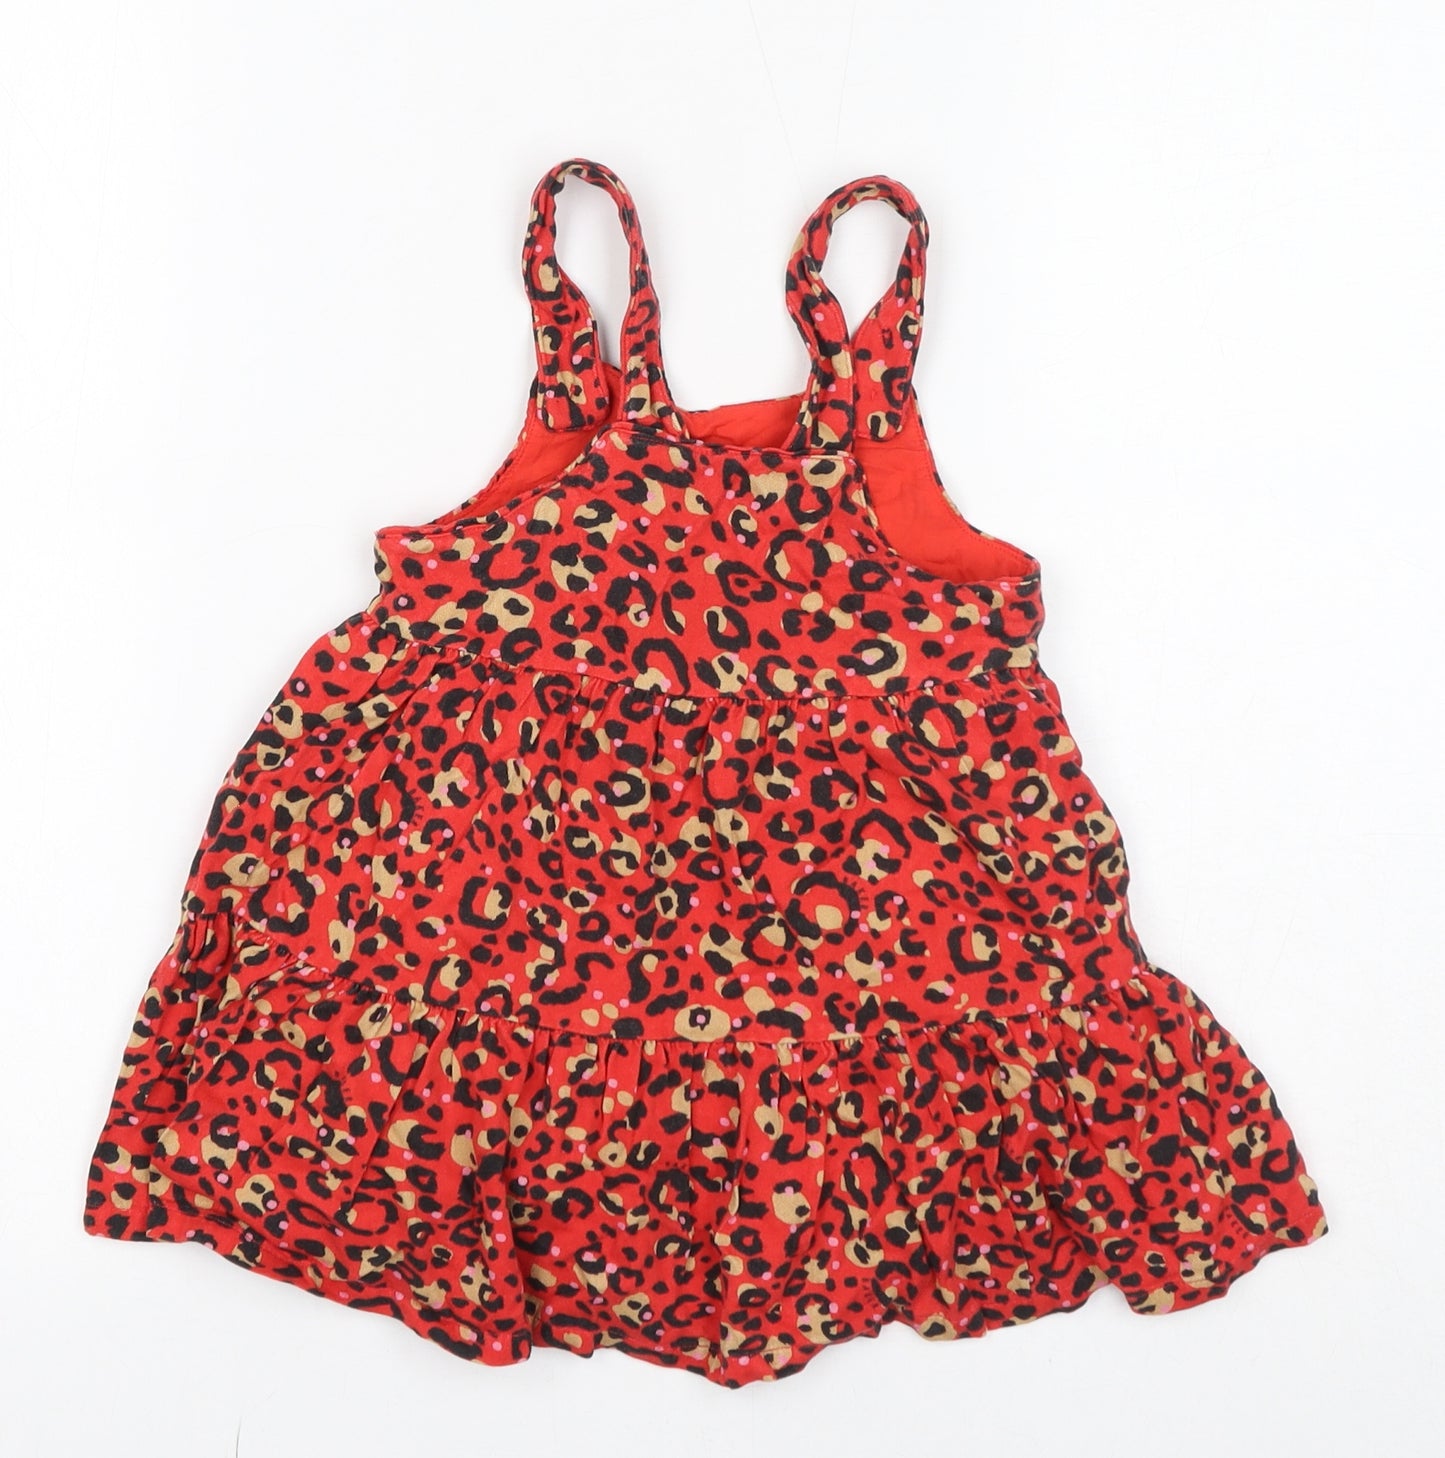 Ted Baker Girls Red Animal Print Viscose Trapeze & Swing Size 2-3 Years Round Neck Button - Leopard Print